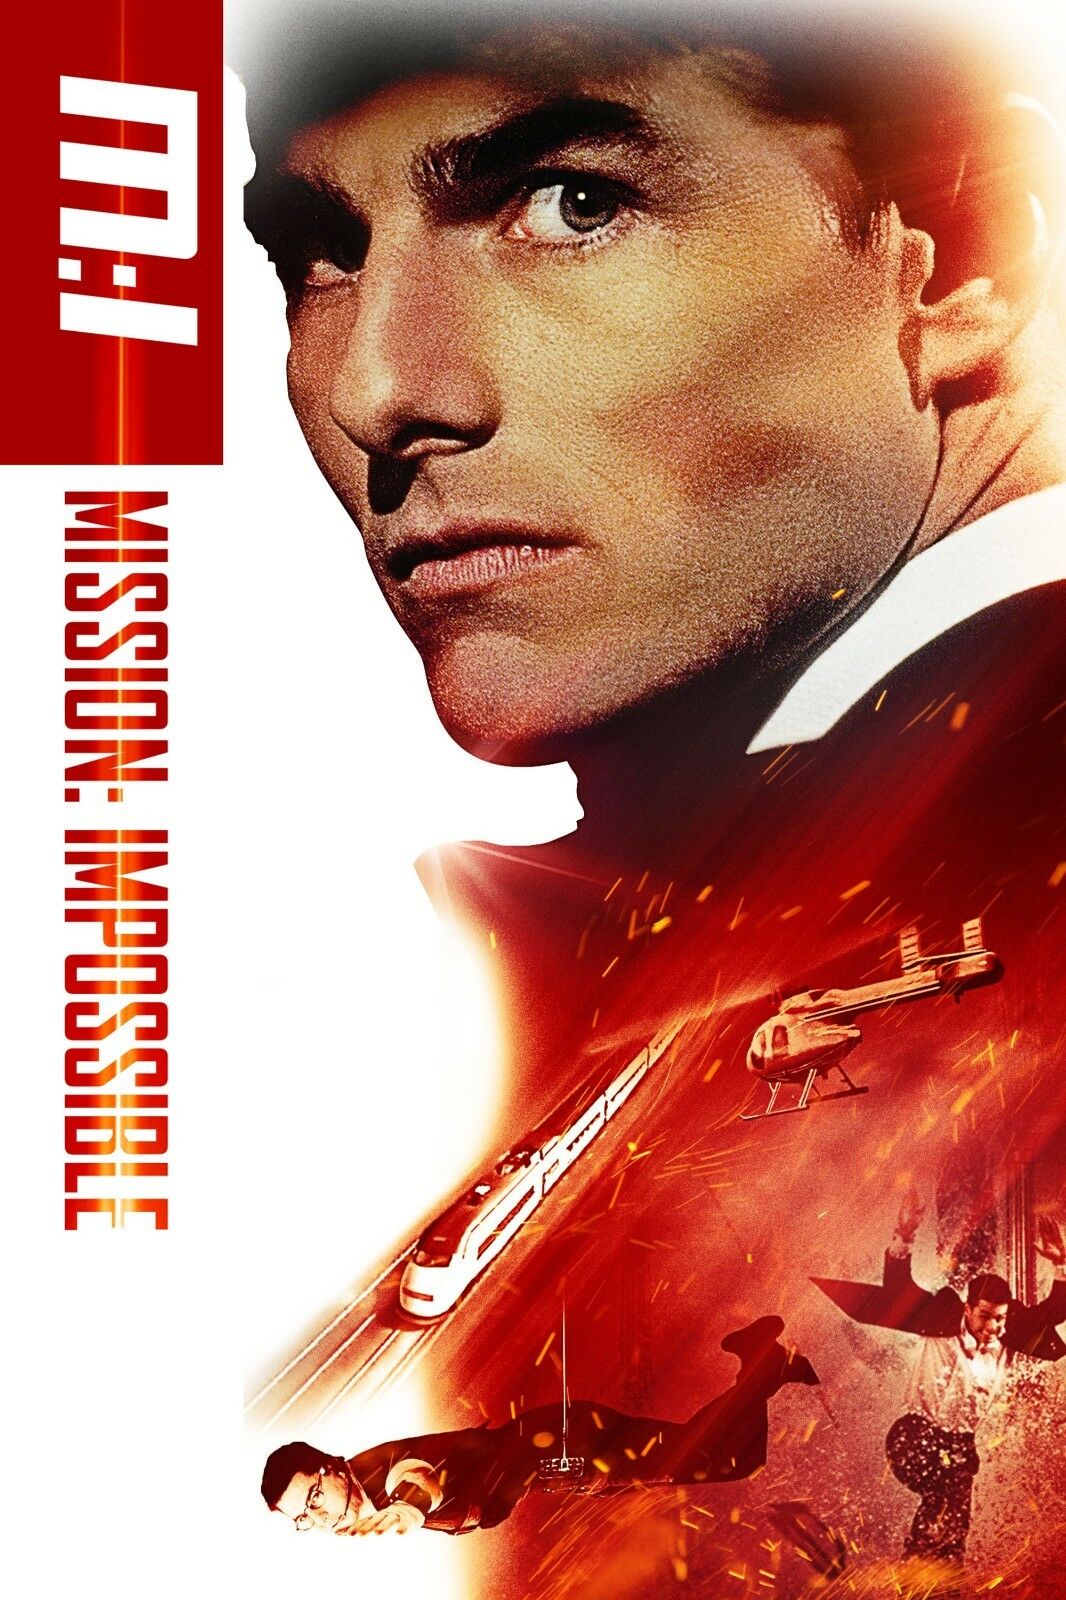 Mission Impossible Movie Review #beverlyhills, #beverlyhillsmagazine, #beverlyhillsmagazinetv, #moviereviews, #moviereviewsonline, #bestmovies, #streamingmovies, #movies, #missionimpossible